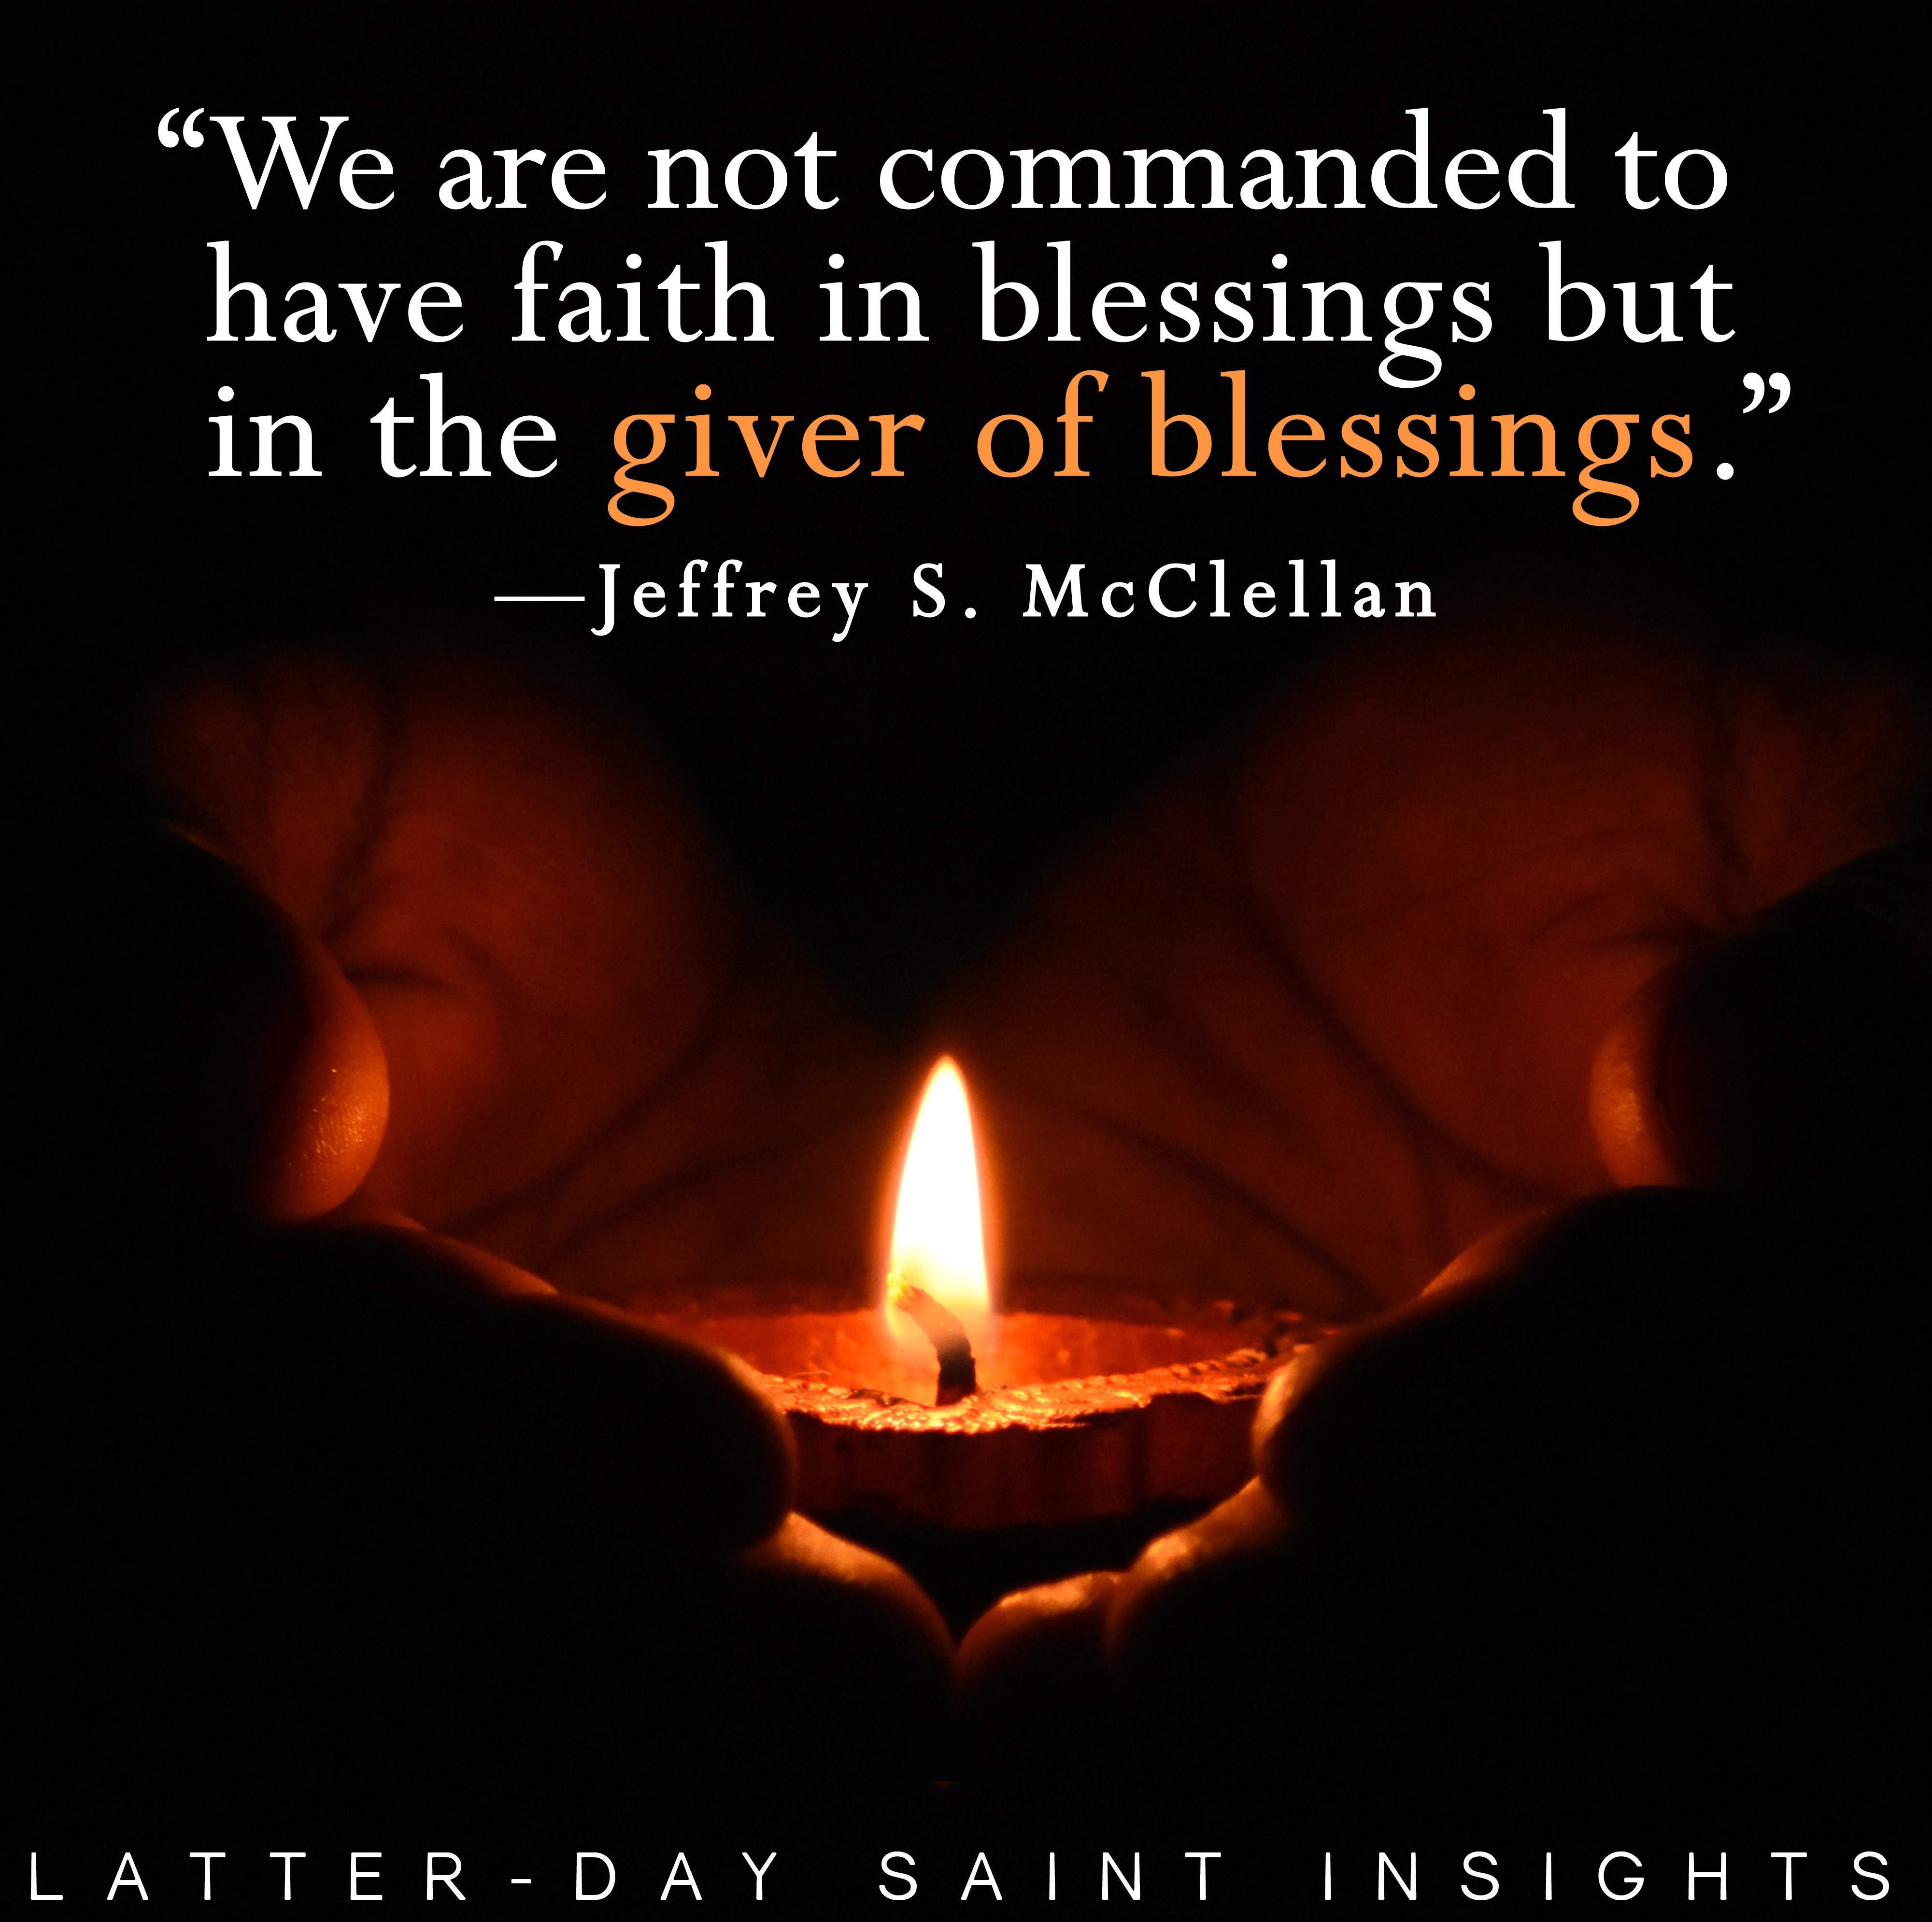 "We are not commanded to have faith in blessings but in the giver of blessings." - Jeffery S. McClellan